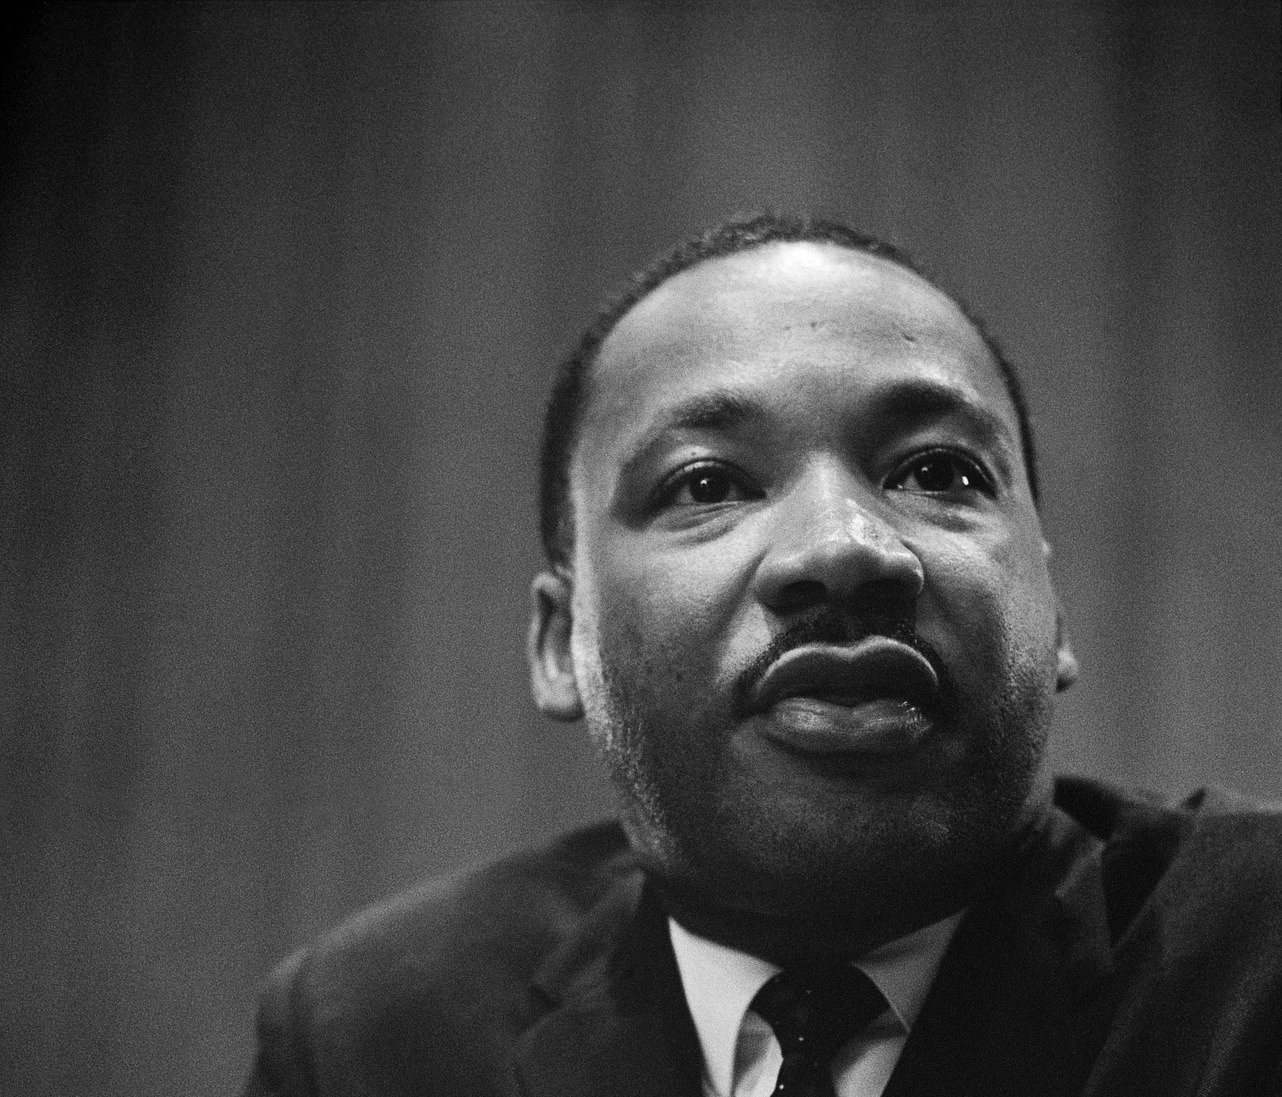 martin luther king https://pixabay.com/it/martin-luther-king-conferenza-stampa-180477/ ©WikiImages CC0